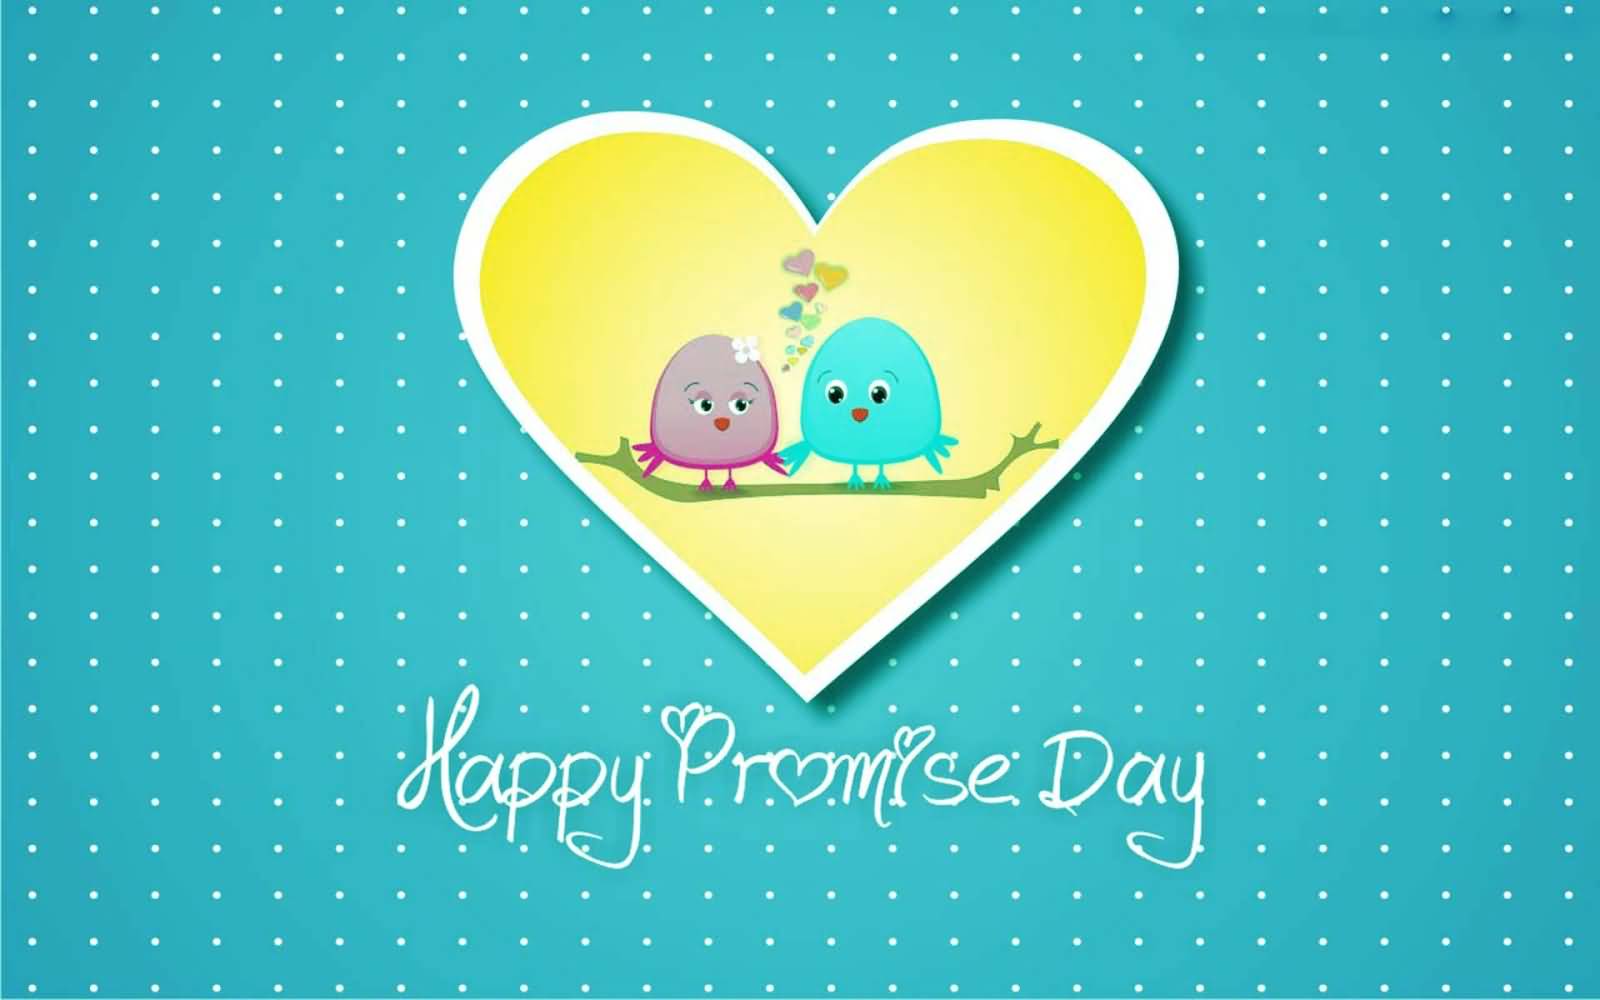 Happy Promise Day Love Birds Greeting Card